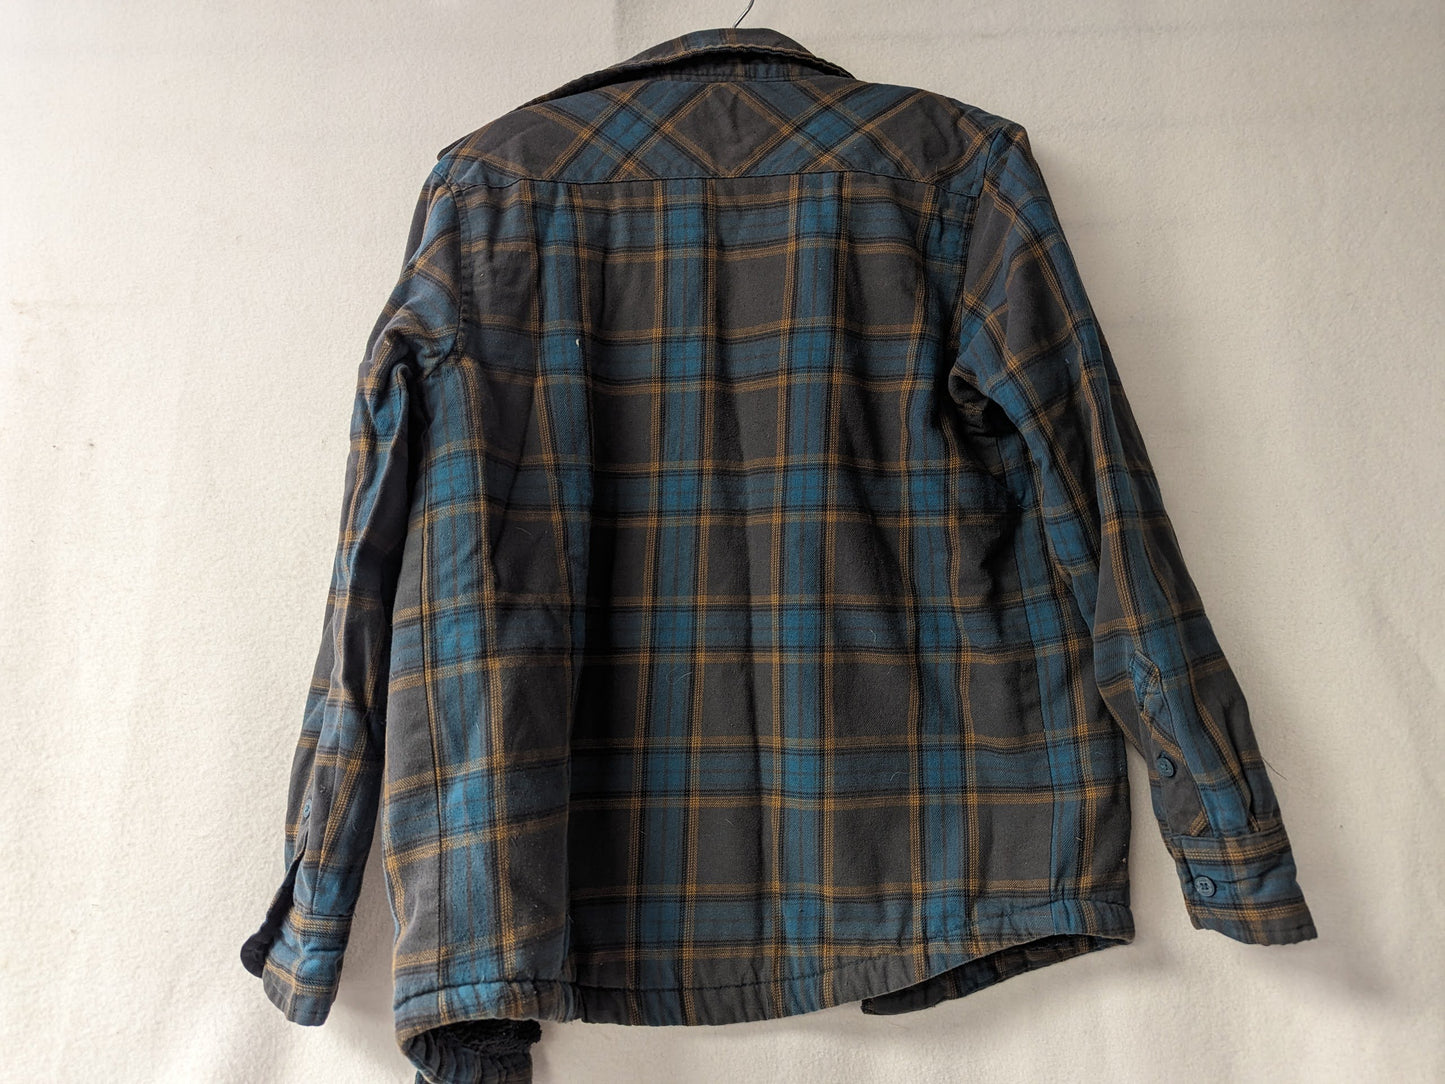 Tony Hawk Youth Lined Flannel Jacket Coat Size Youth Large Color Plaid Condition Used